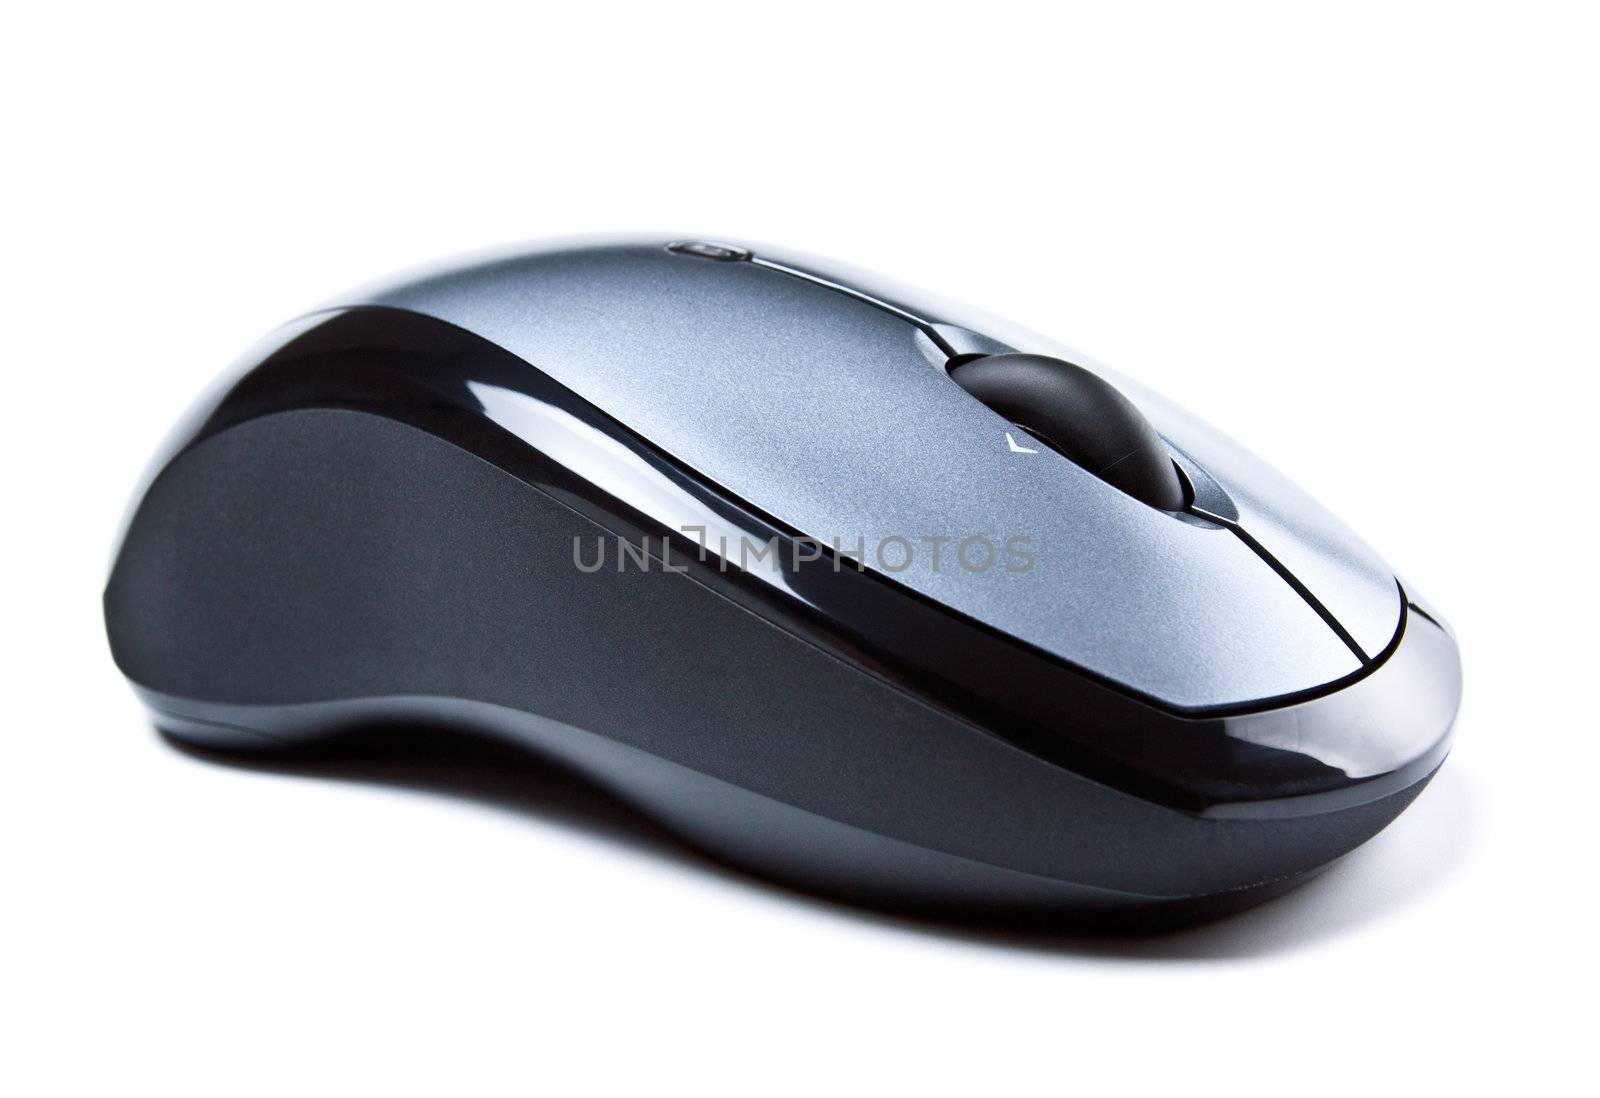 wireless computer mouse by petr_malyshev